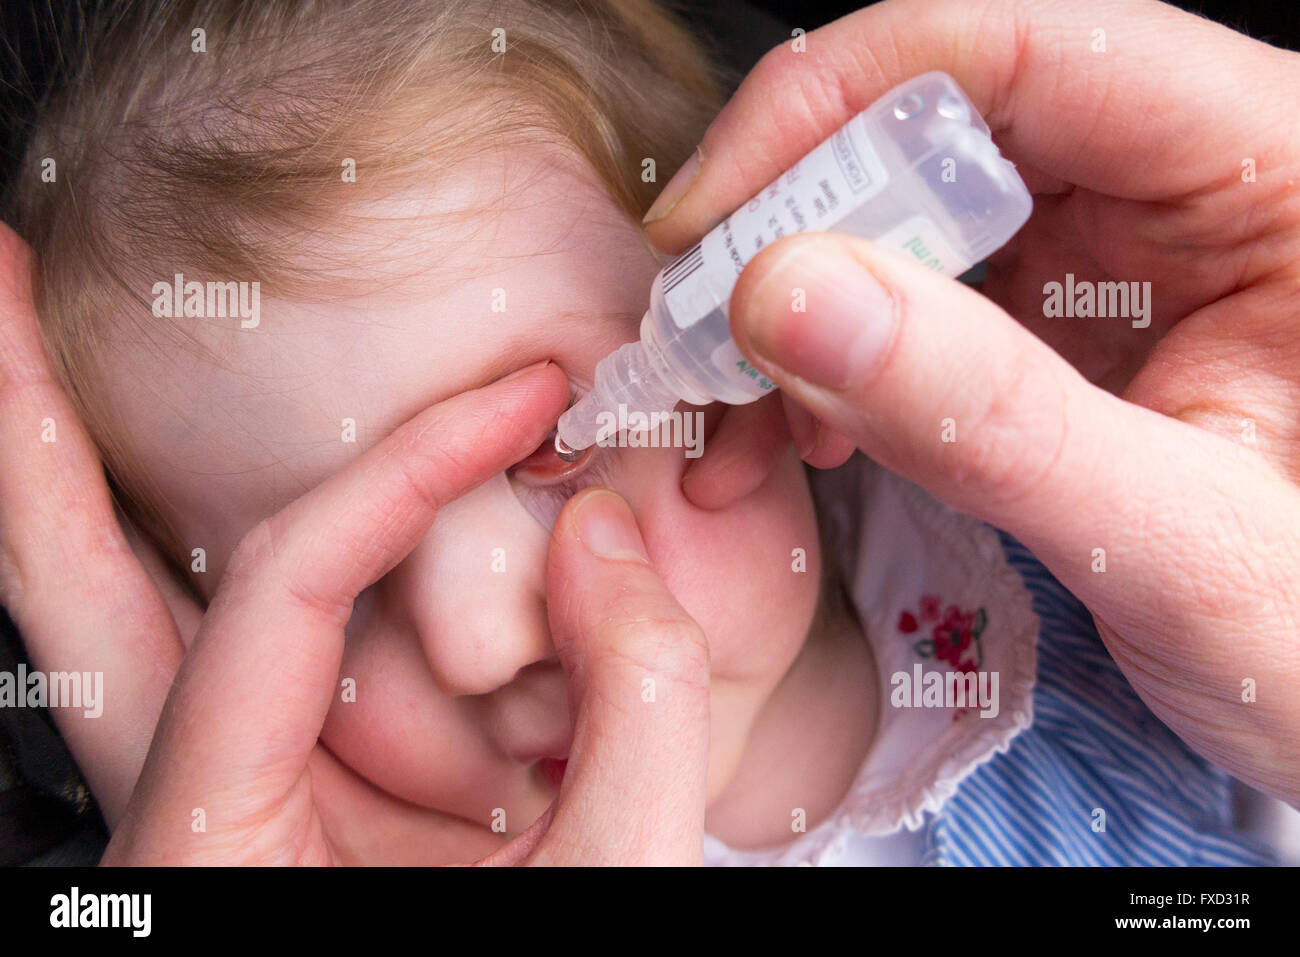 20 Month old child / kid toddler baby with  conjunctivitis being given antibiotic eye drops drop by her mum / mother Stock Photo